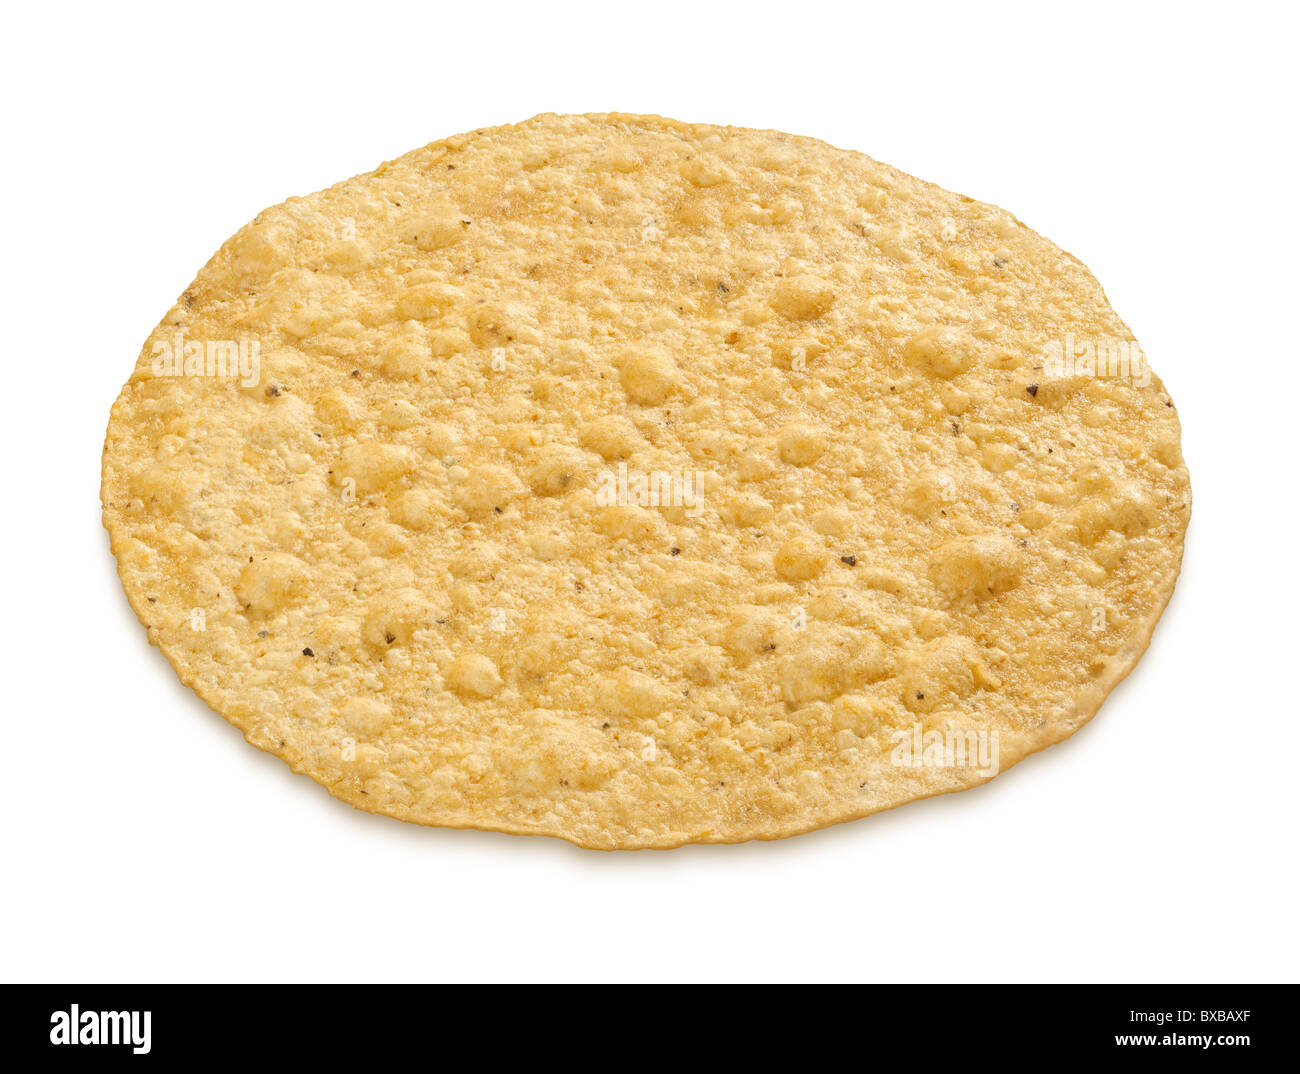 Tostada Isolated on a white background. Full focus front & back. Stock Photo